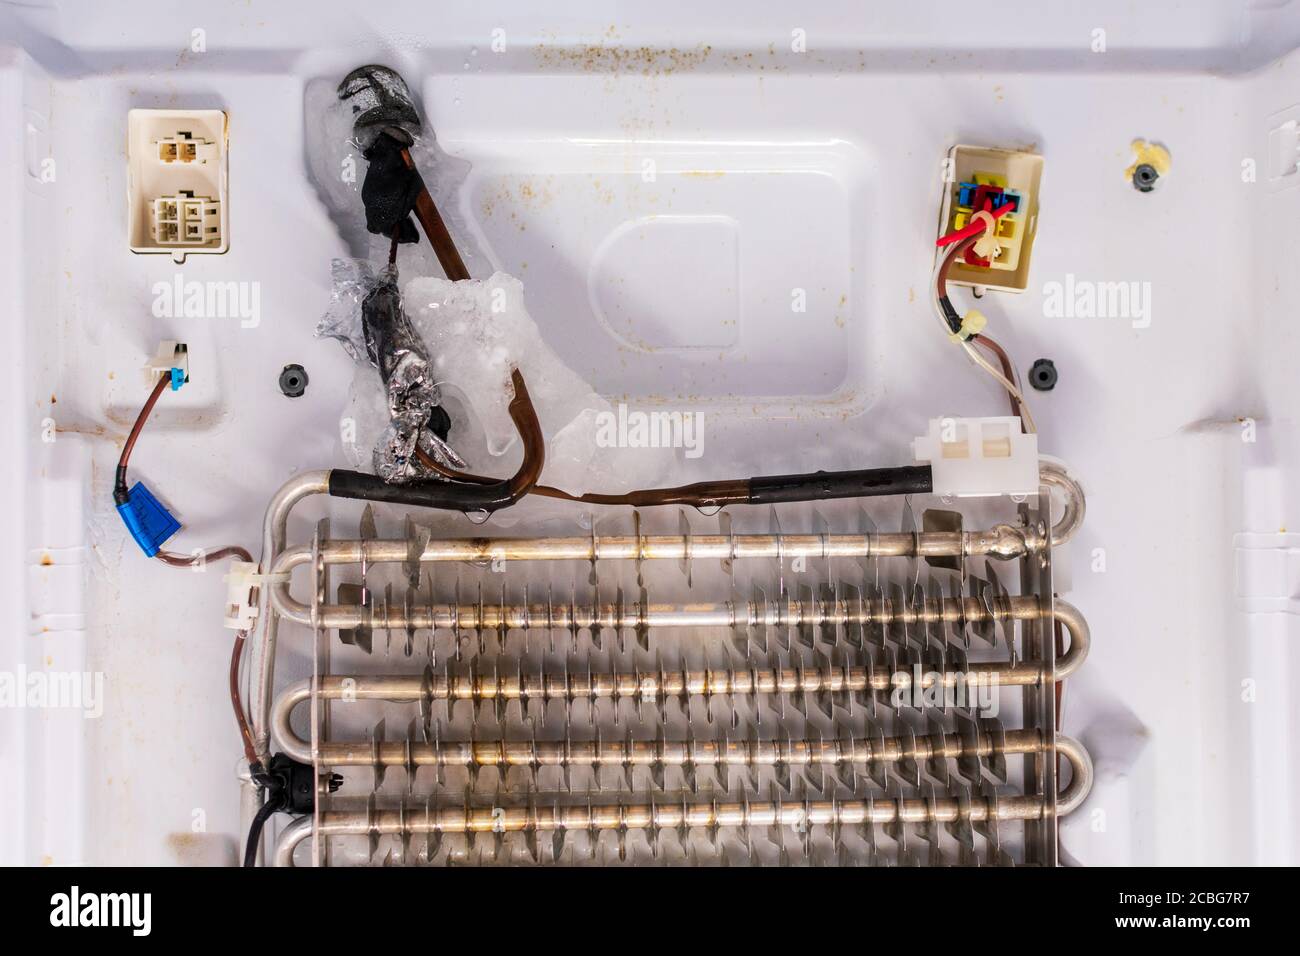 Refrigerator repair. Freezer compartment back panel removed. Evaporator coils with a frozen thermostat. Stock Photo